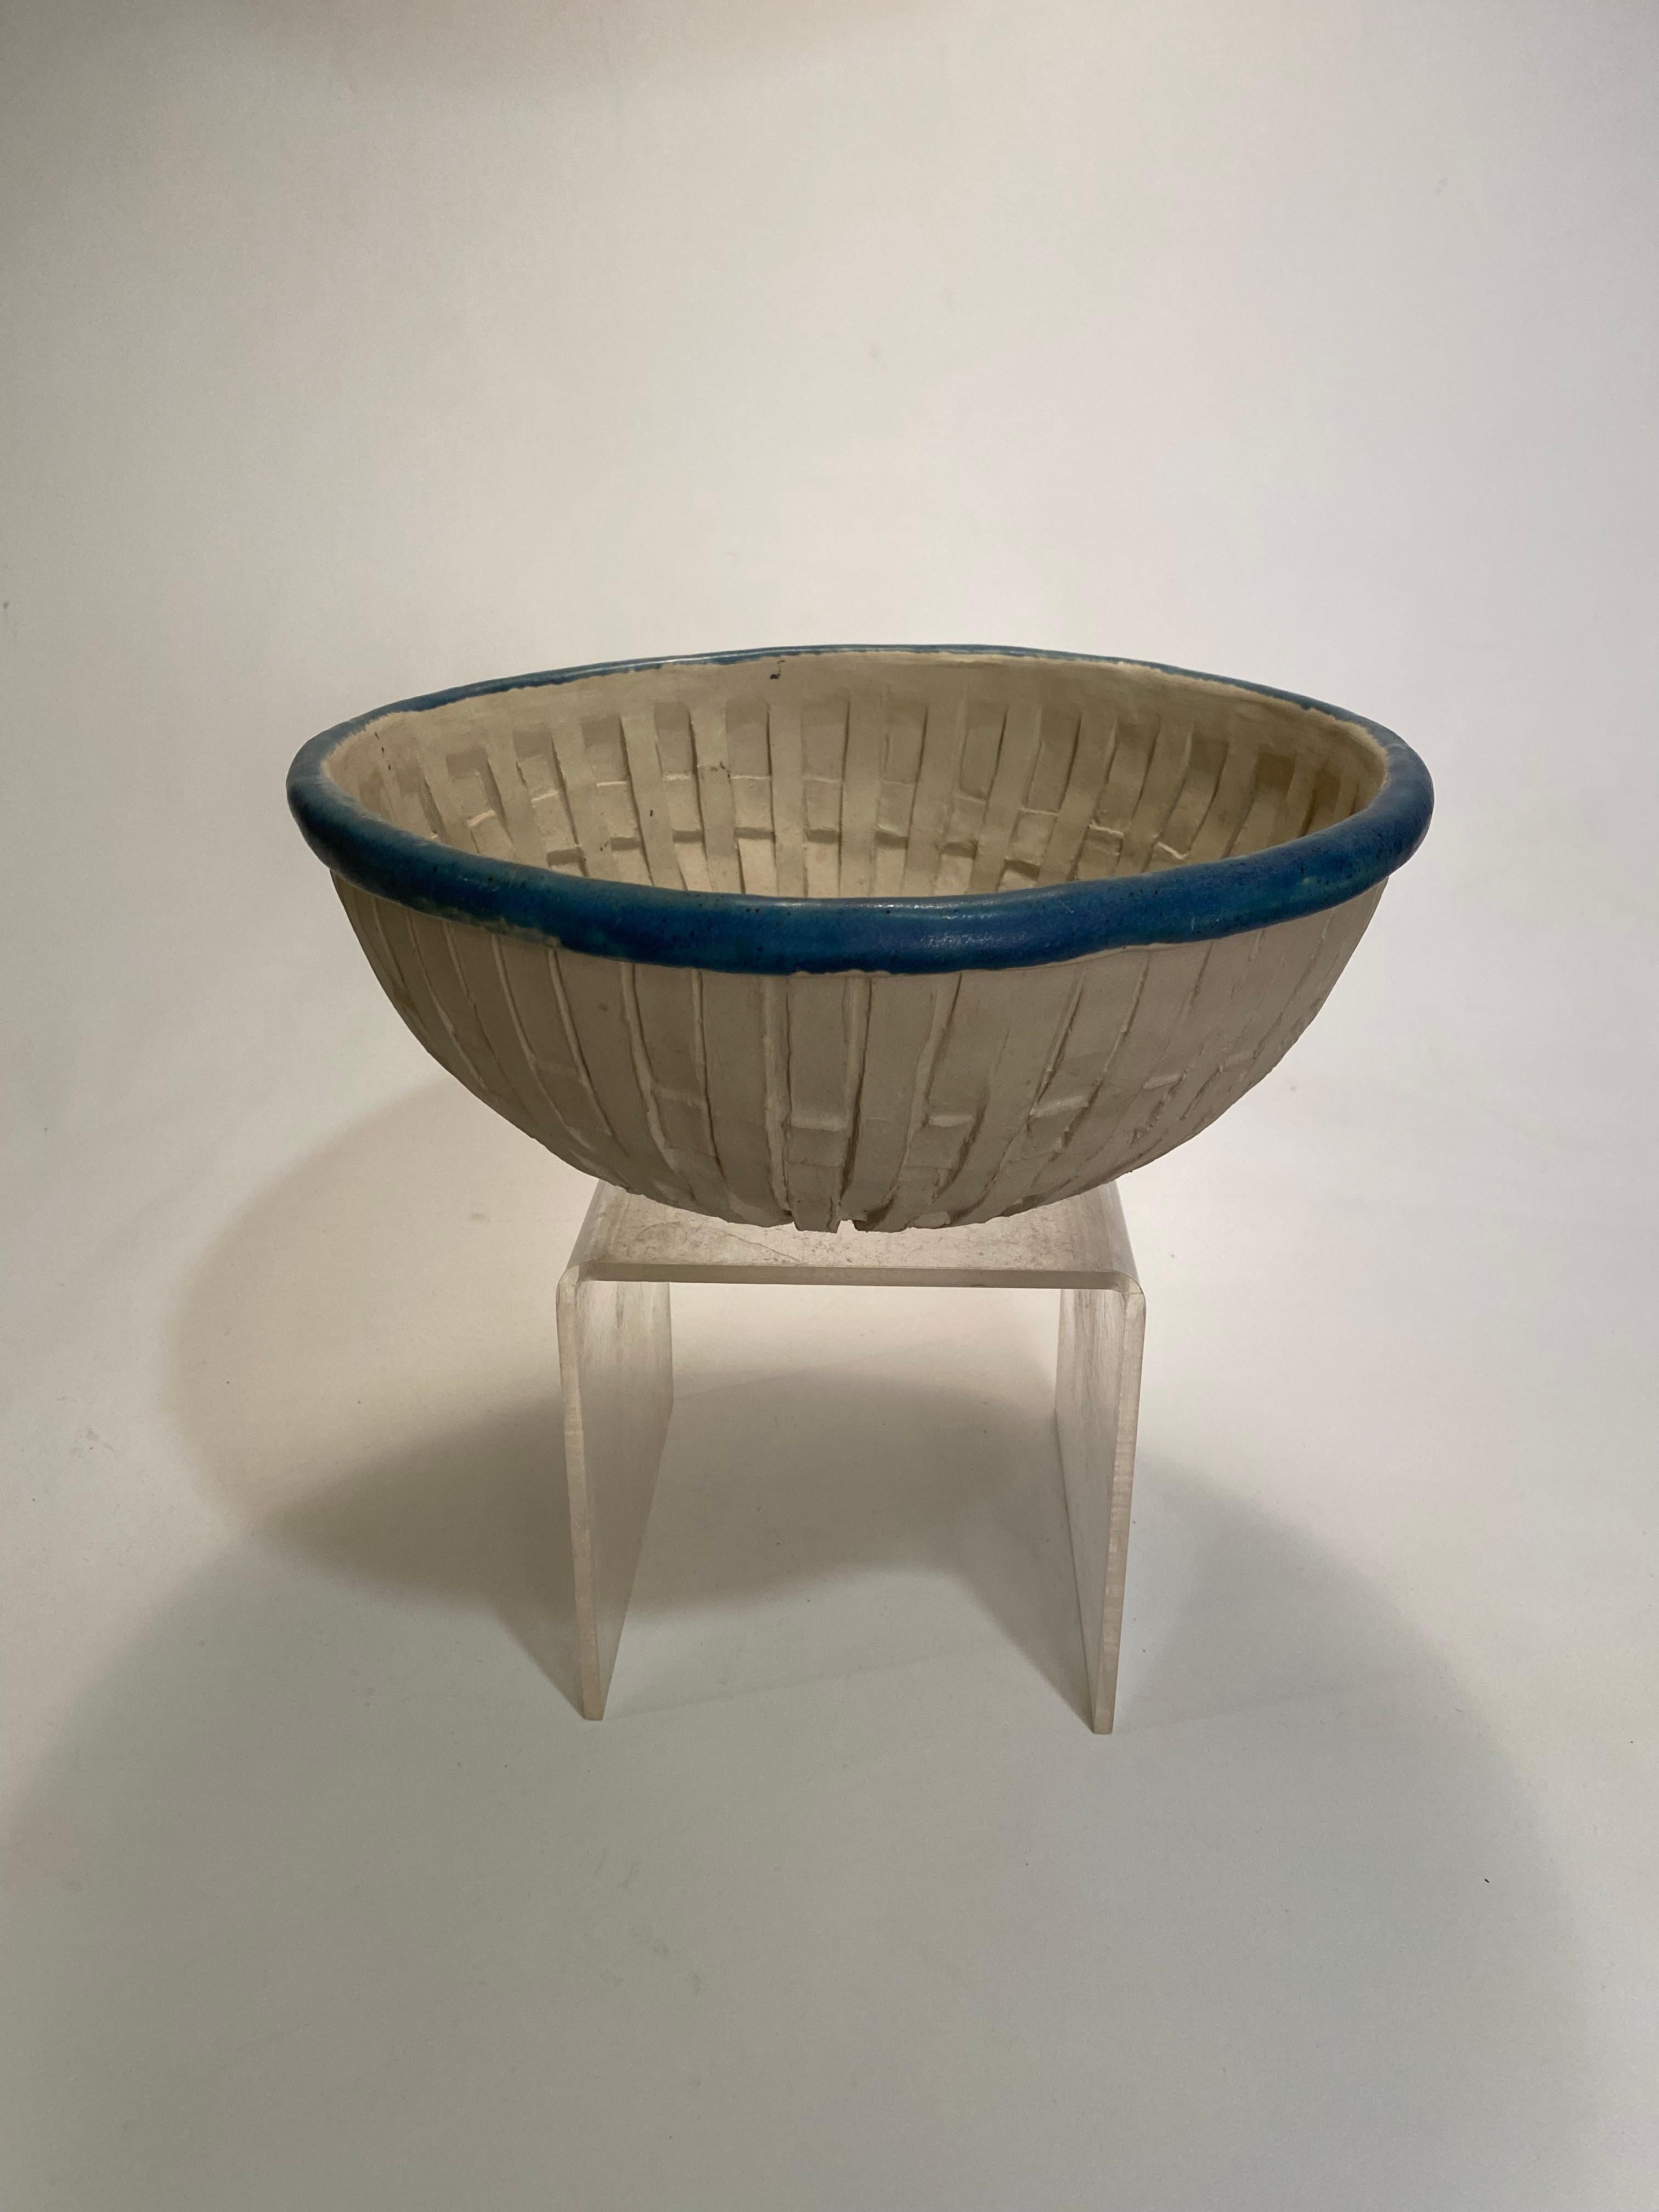 Very fine large hand carved David Gil bowl for Bennington Potters, Vermont. Blue glazed applied lip with a hand carved lattice decoration adorning the interior and exterior of the bowl. A very good example of the hand crafted piece coming from The